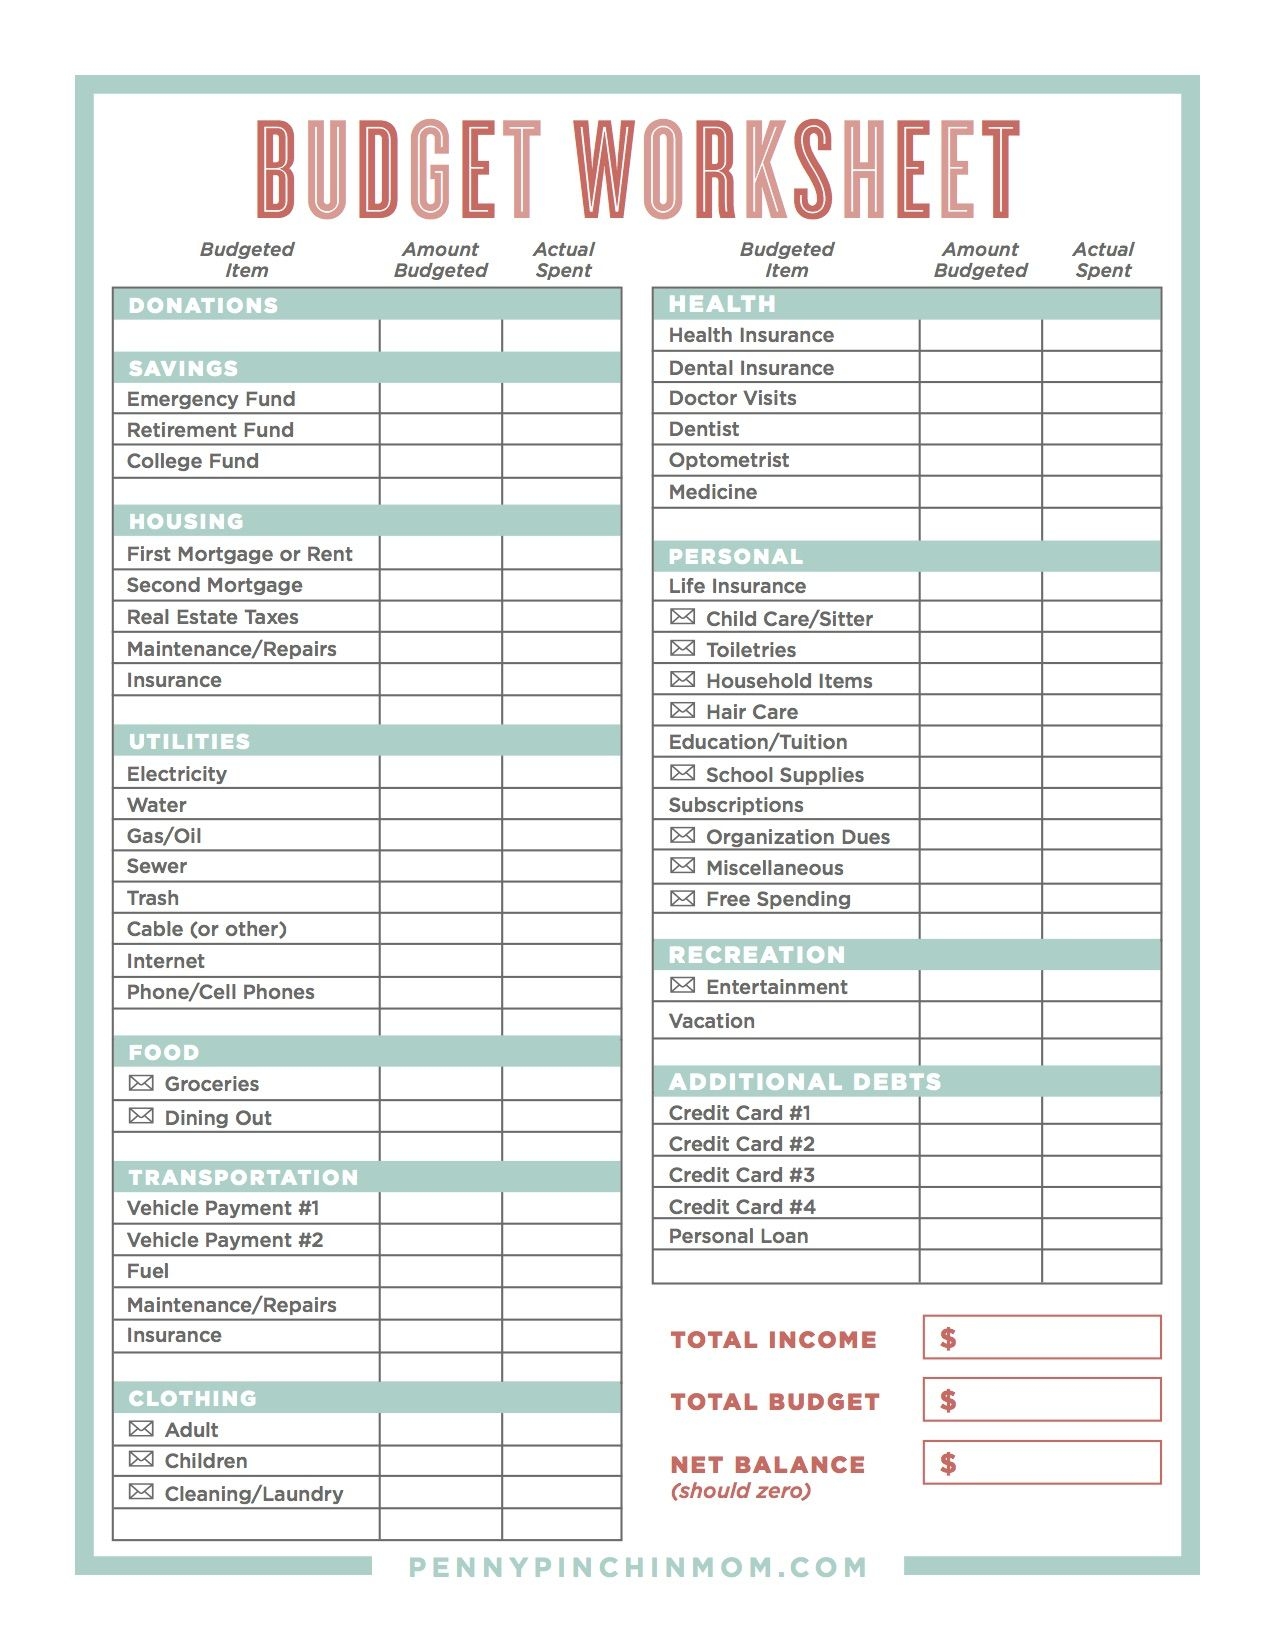 Making A Budget Spreadsheet Budgeting Worksheets Budgeting Money Monthly Budget Template